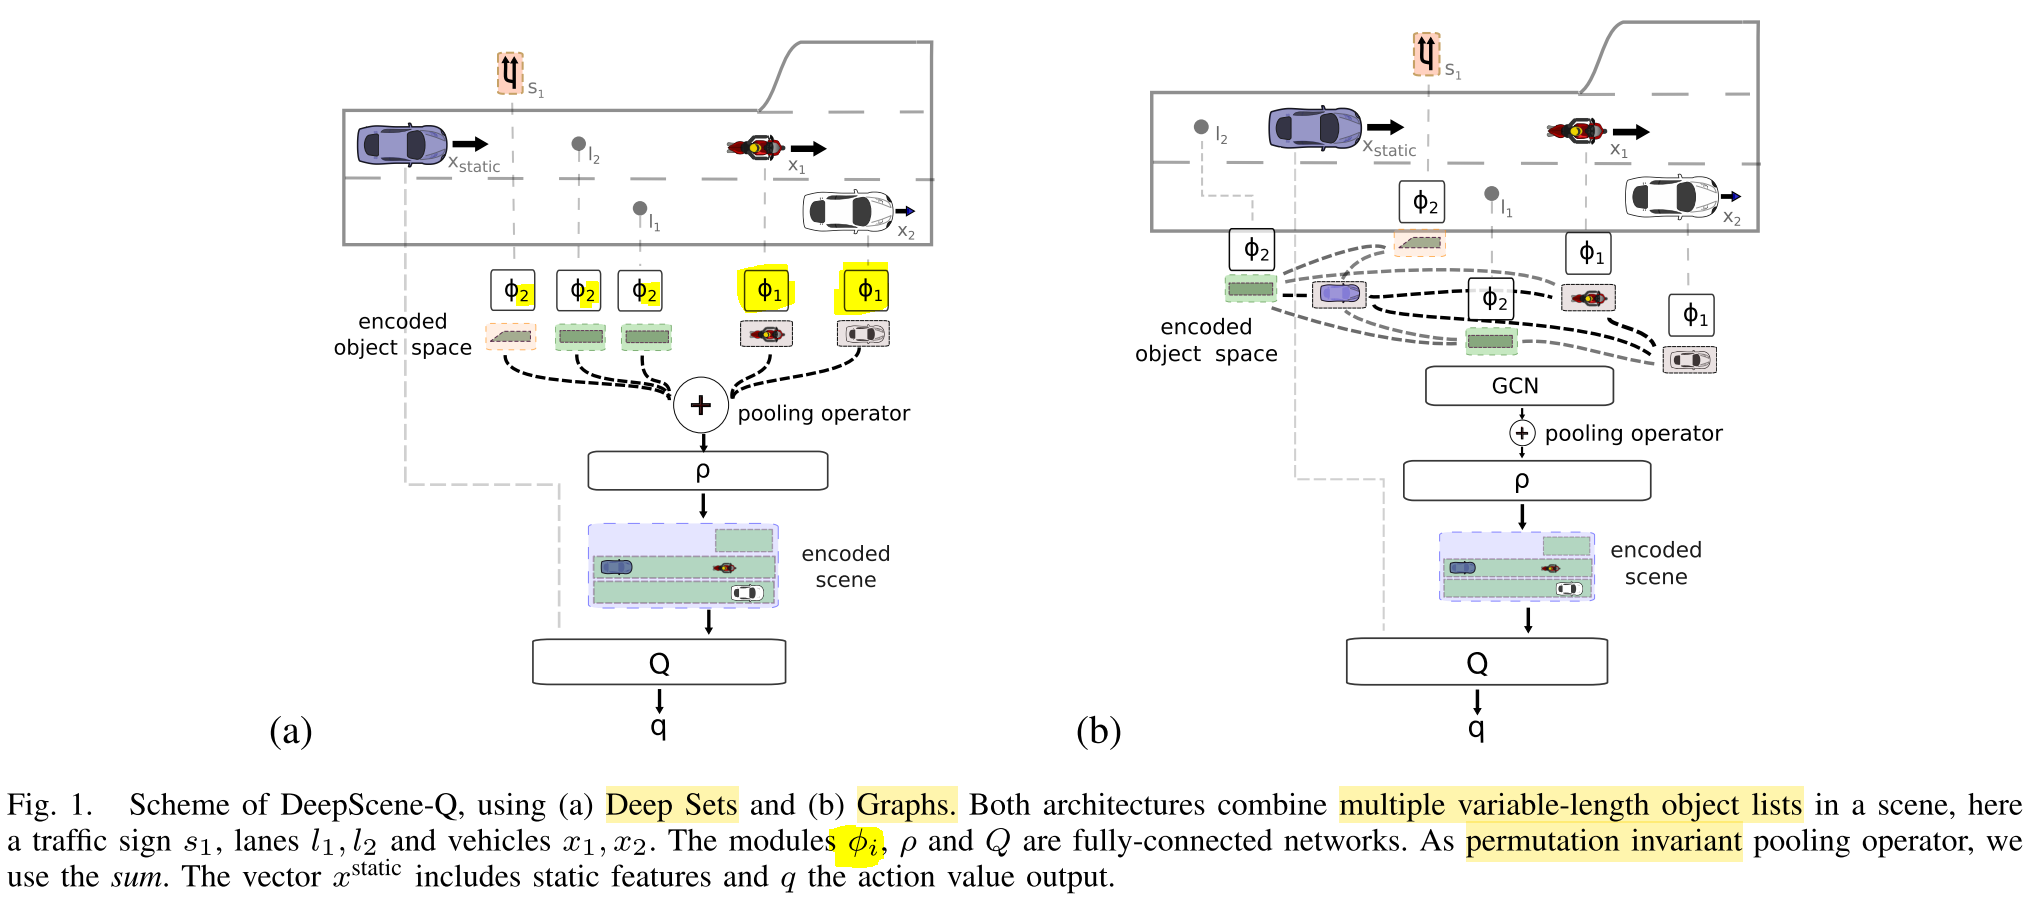 In the proposed DeepSet approach, embeddings are first created depending on the object type (using φ1 for vehicles and φ2 for lanes), forming the encoded scene. They are 'merged' only in a second stage to create a fixed vector representation. Deep Set can be extended with Graph Convolutional Networks when combining the set of node features to capture the relations - interaction - between vehicles. Source.